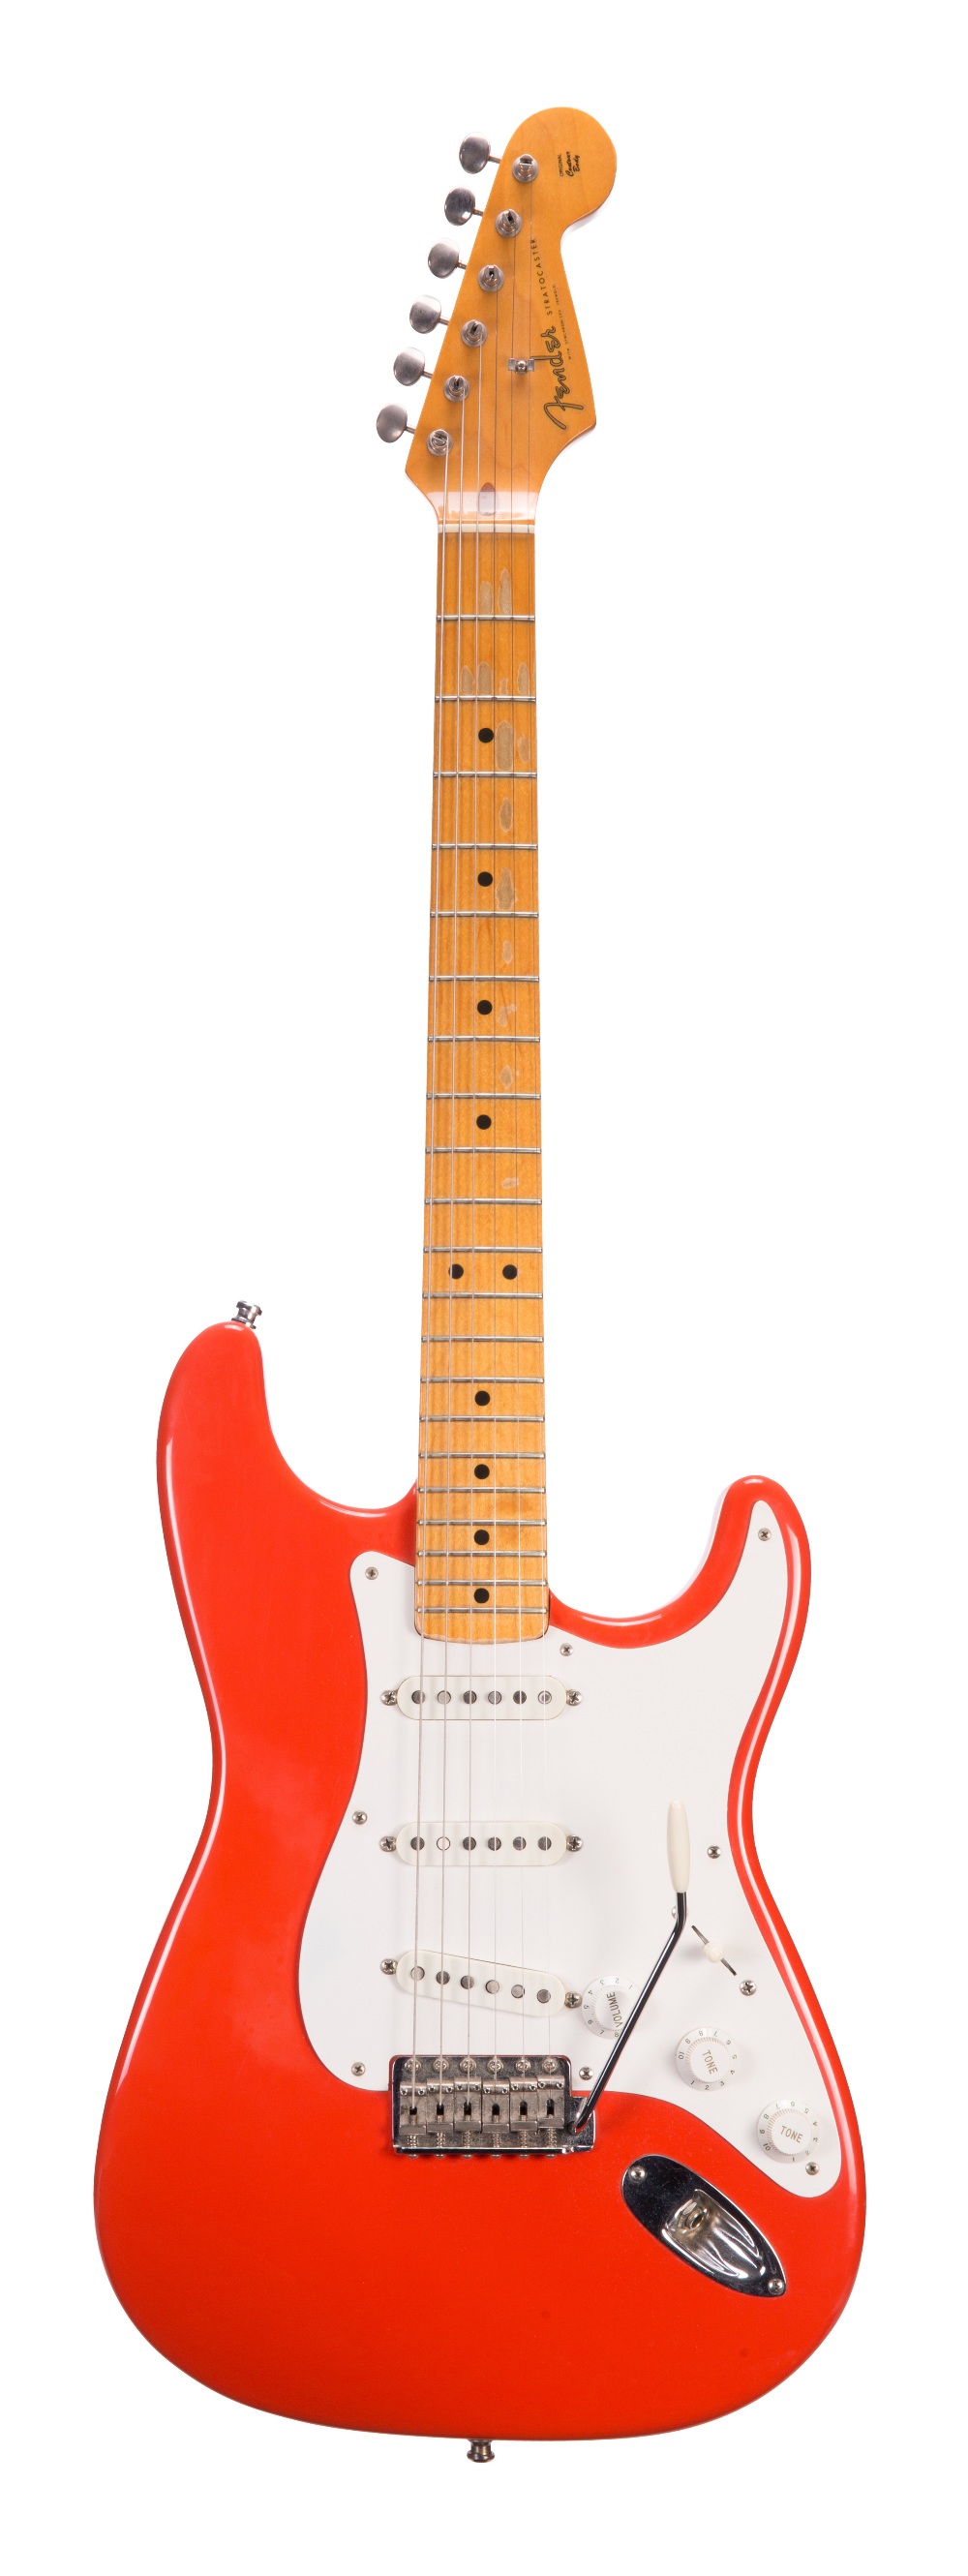 1989 Fender American Vintage Series '57 Stratocaster electric guitar, made in USA, ser. no. V0xxx08;